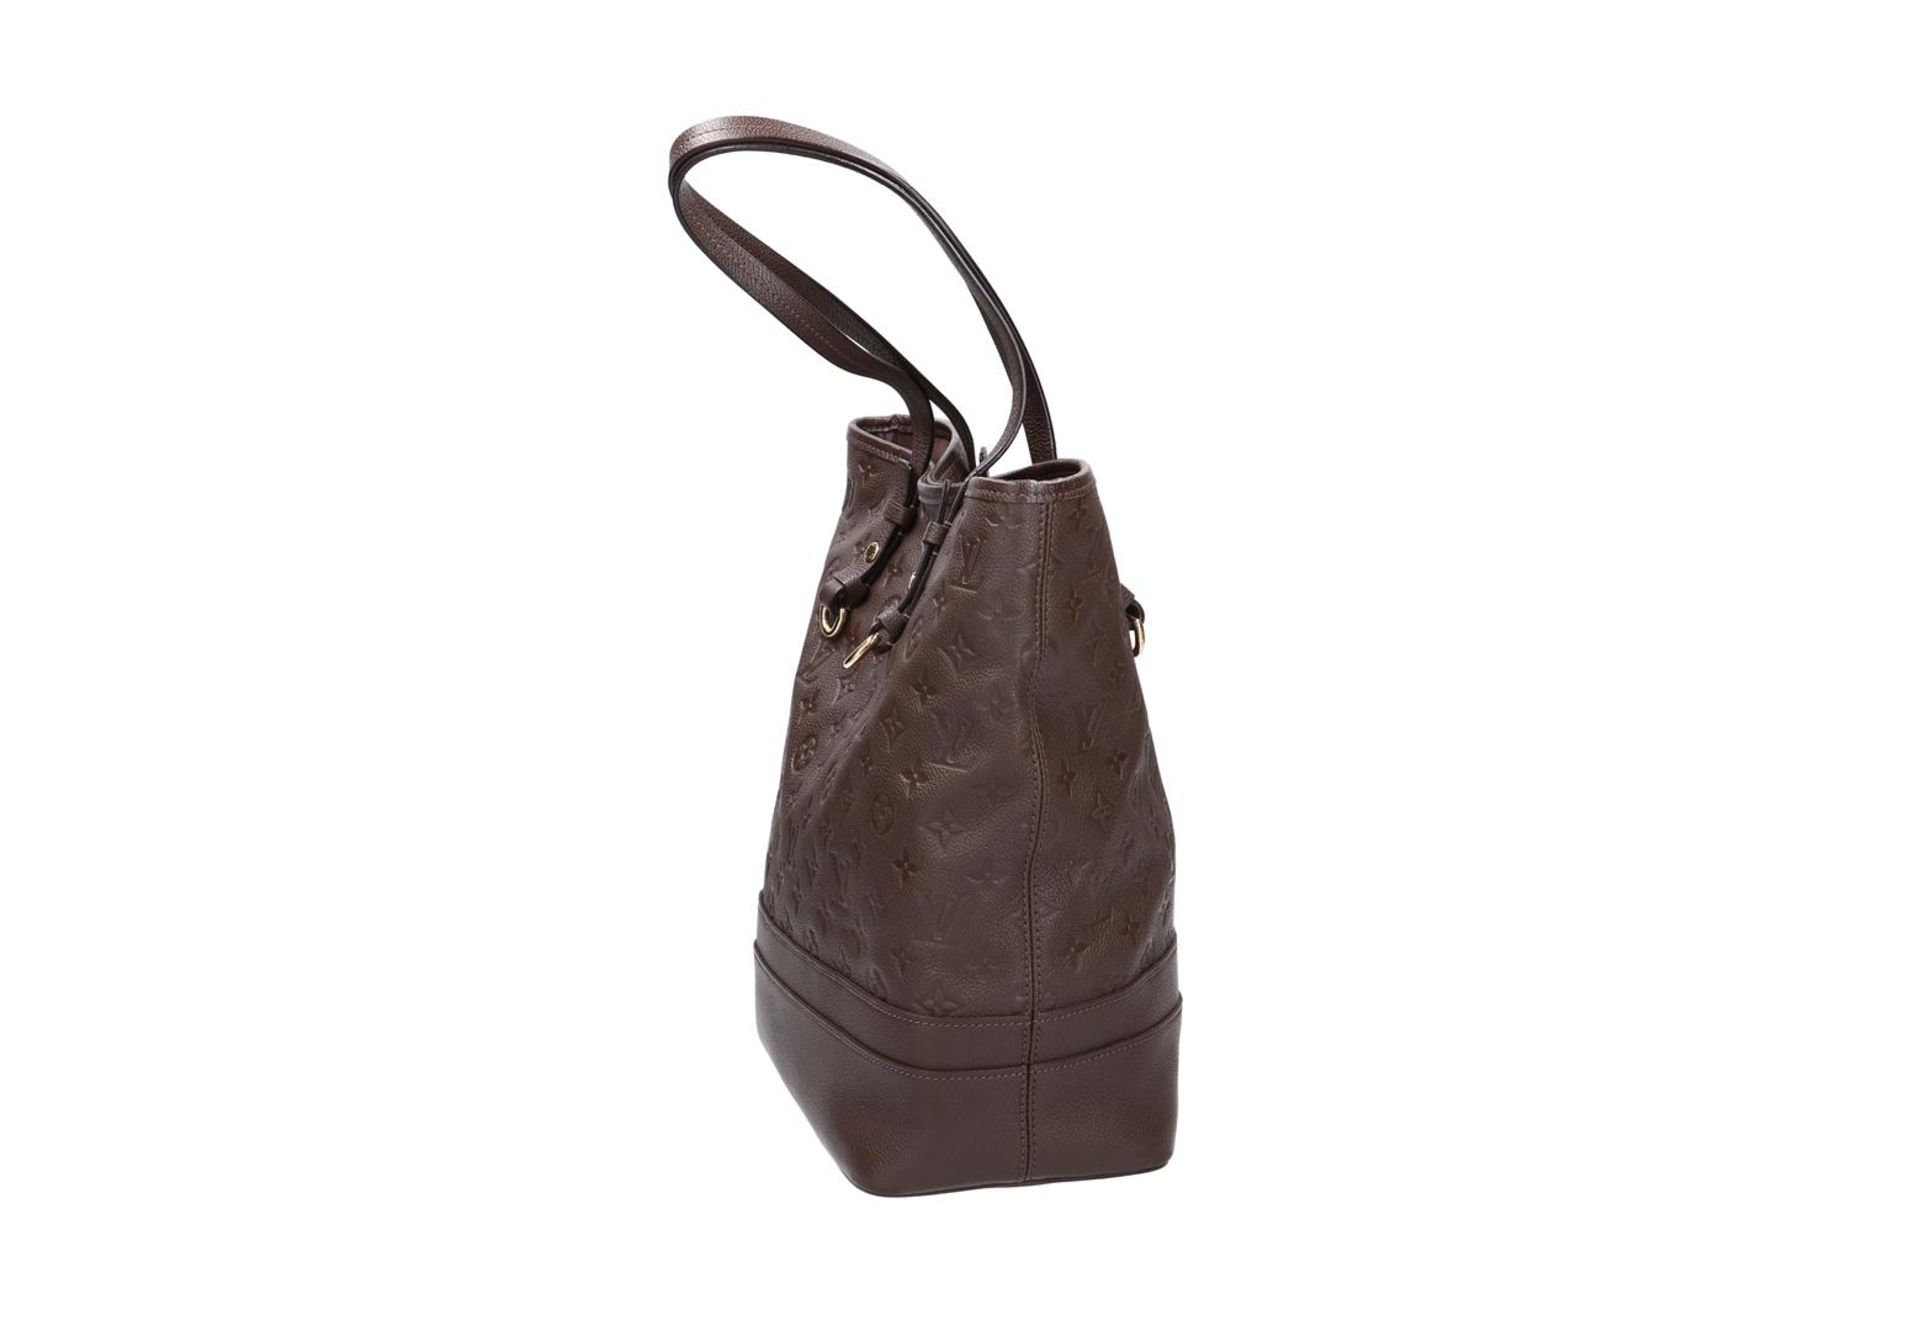 Louis Vuitton, brown leather embossed monogram tote bag, 'Citadines', no. AH2102. H x W x D: 31 x 31 - Image 3 of 4